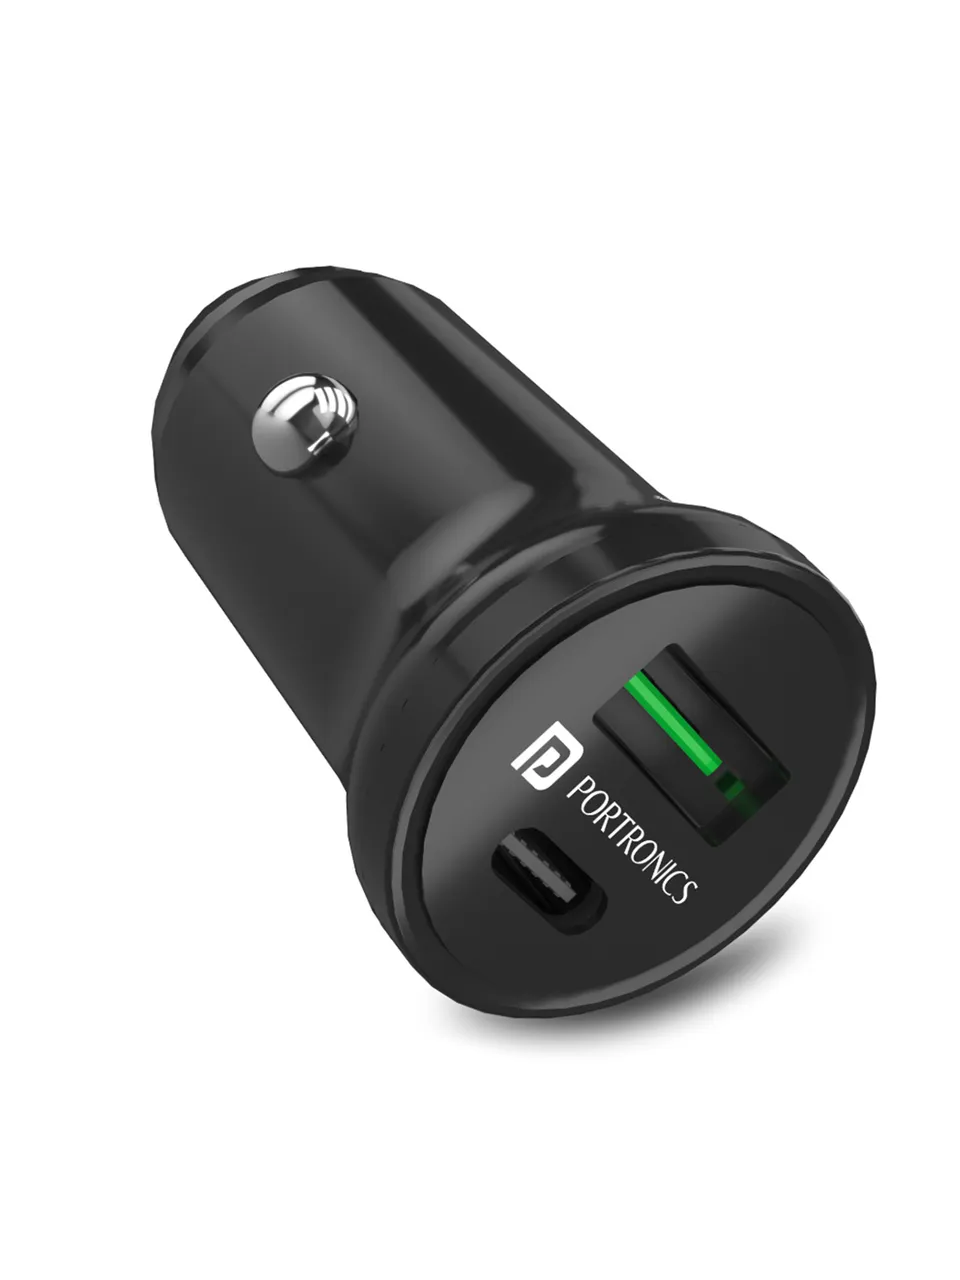 CarPower Mini Car Charger with Dual Output Type C PD 18W-QC 3.0A (Black)